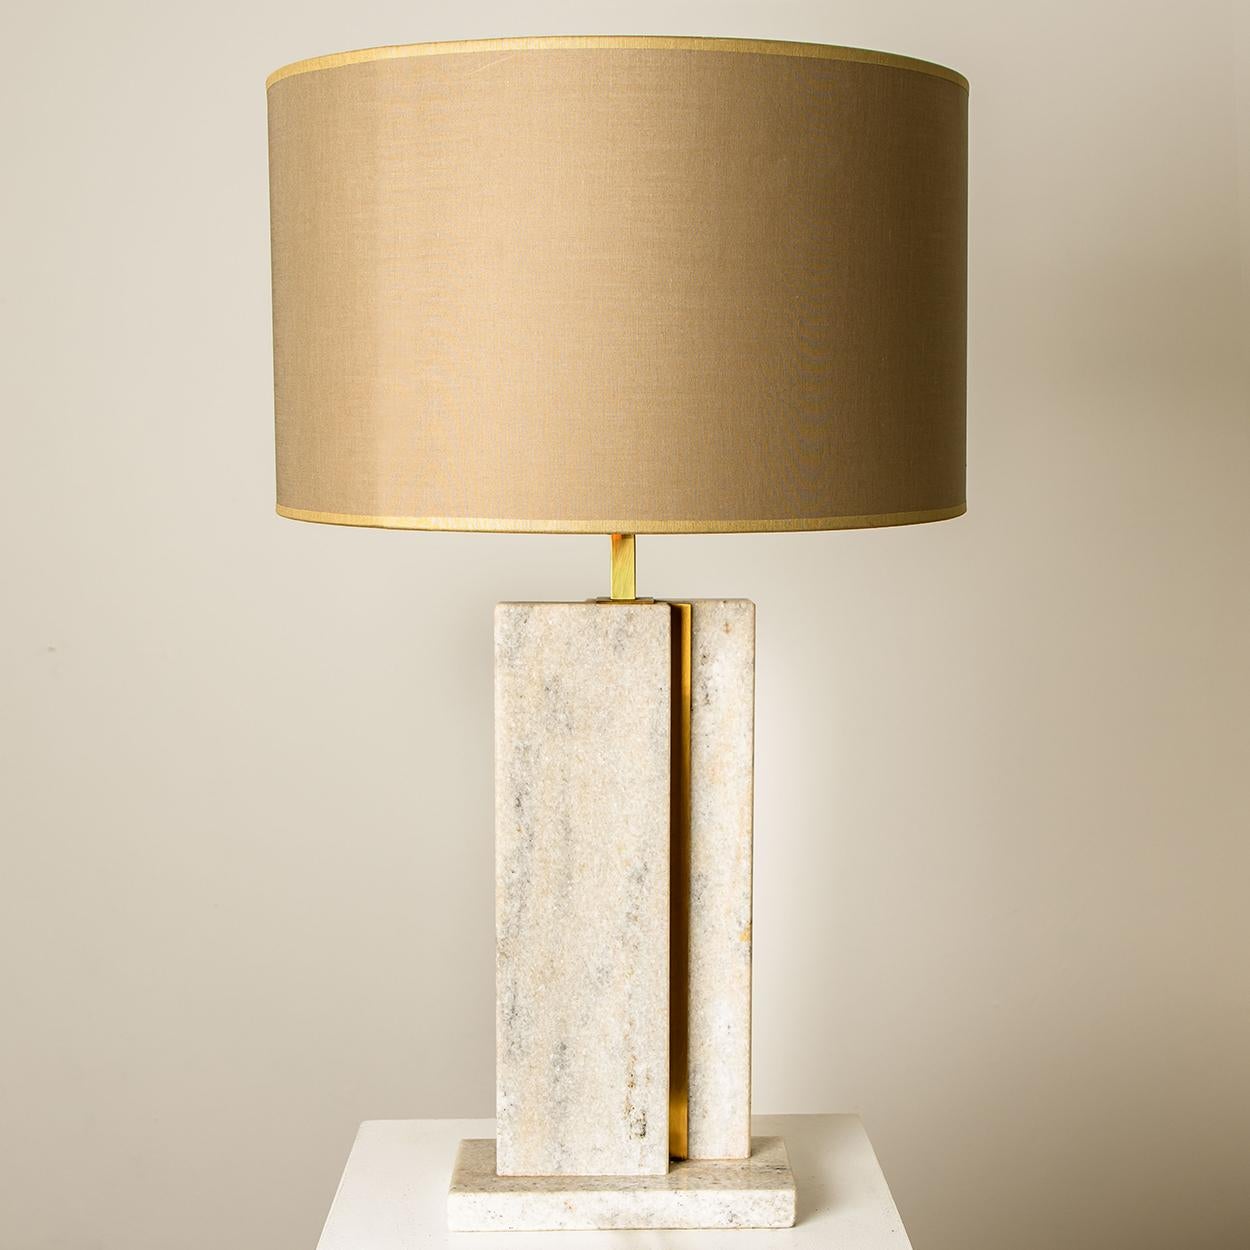 Mid-Century Modern Camille Breesch Travertine Table Lamp with New Shade For Sale